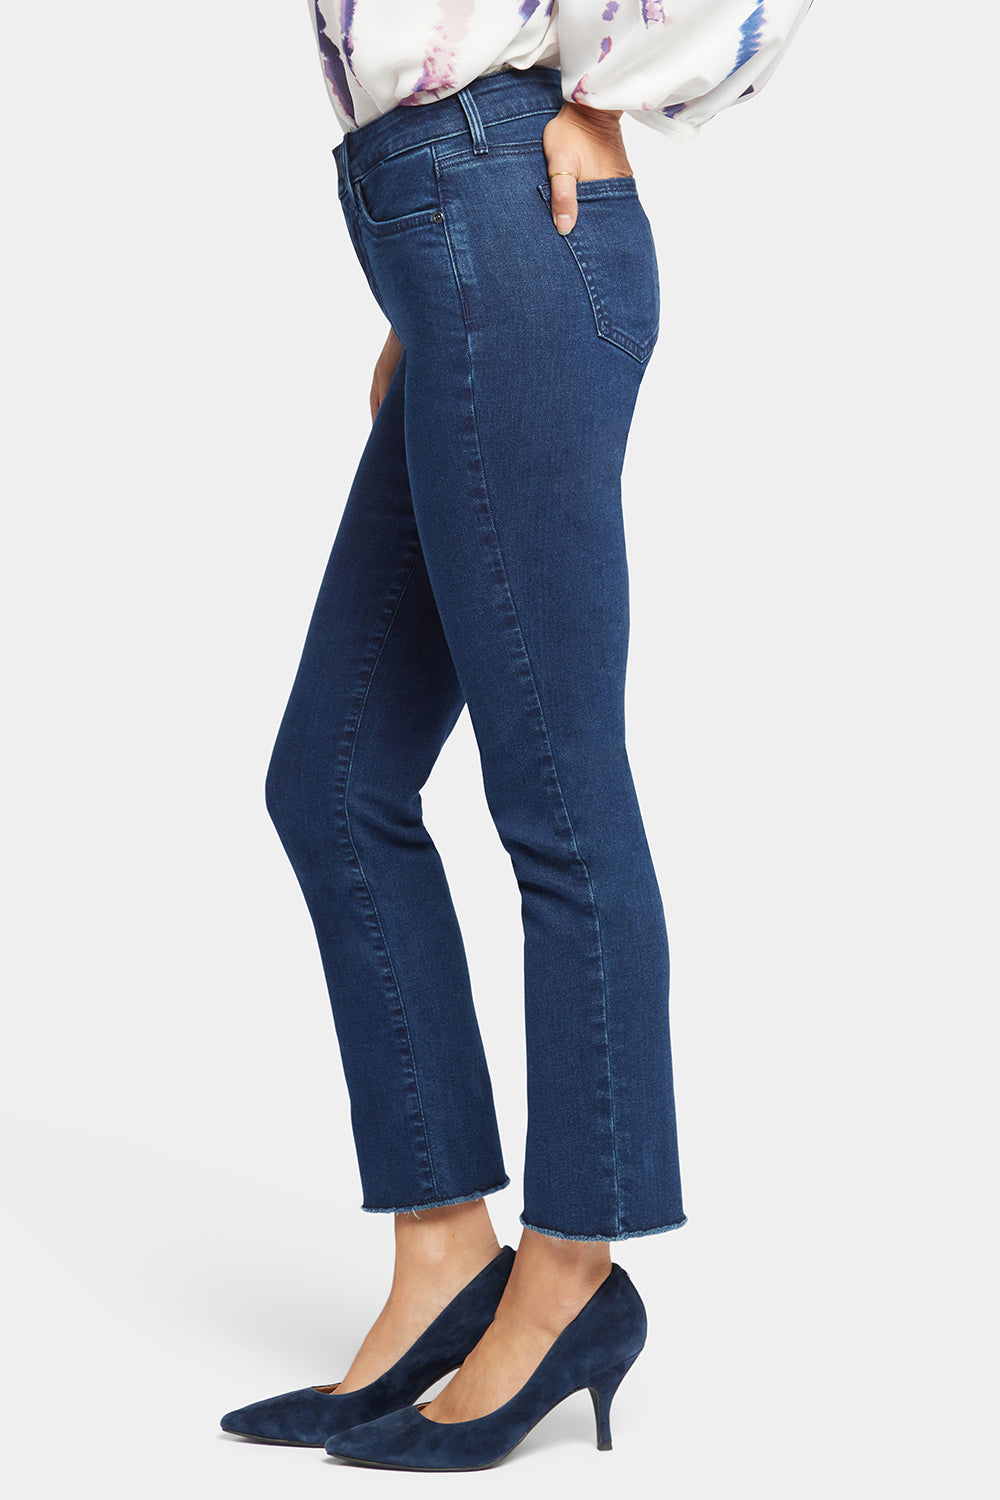 These J.Crew Jeans Come With Me on Every Trip